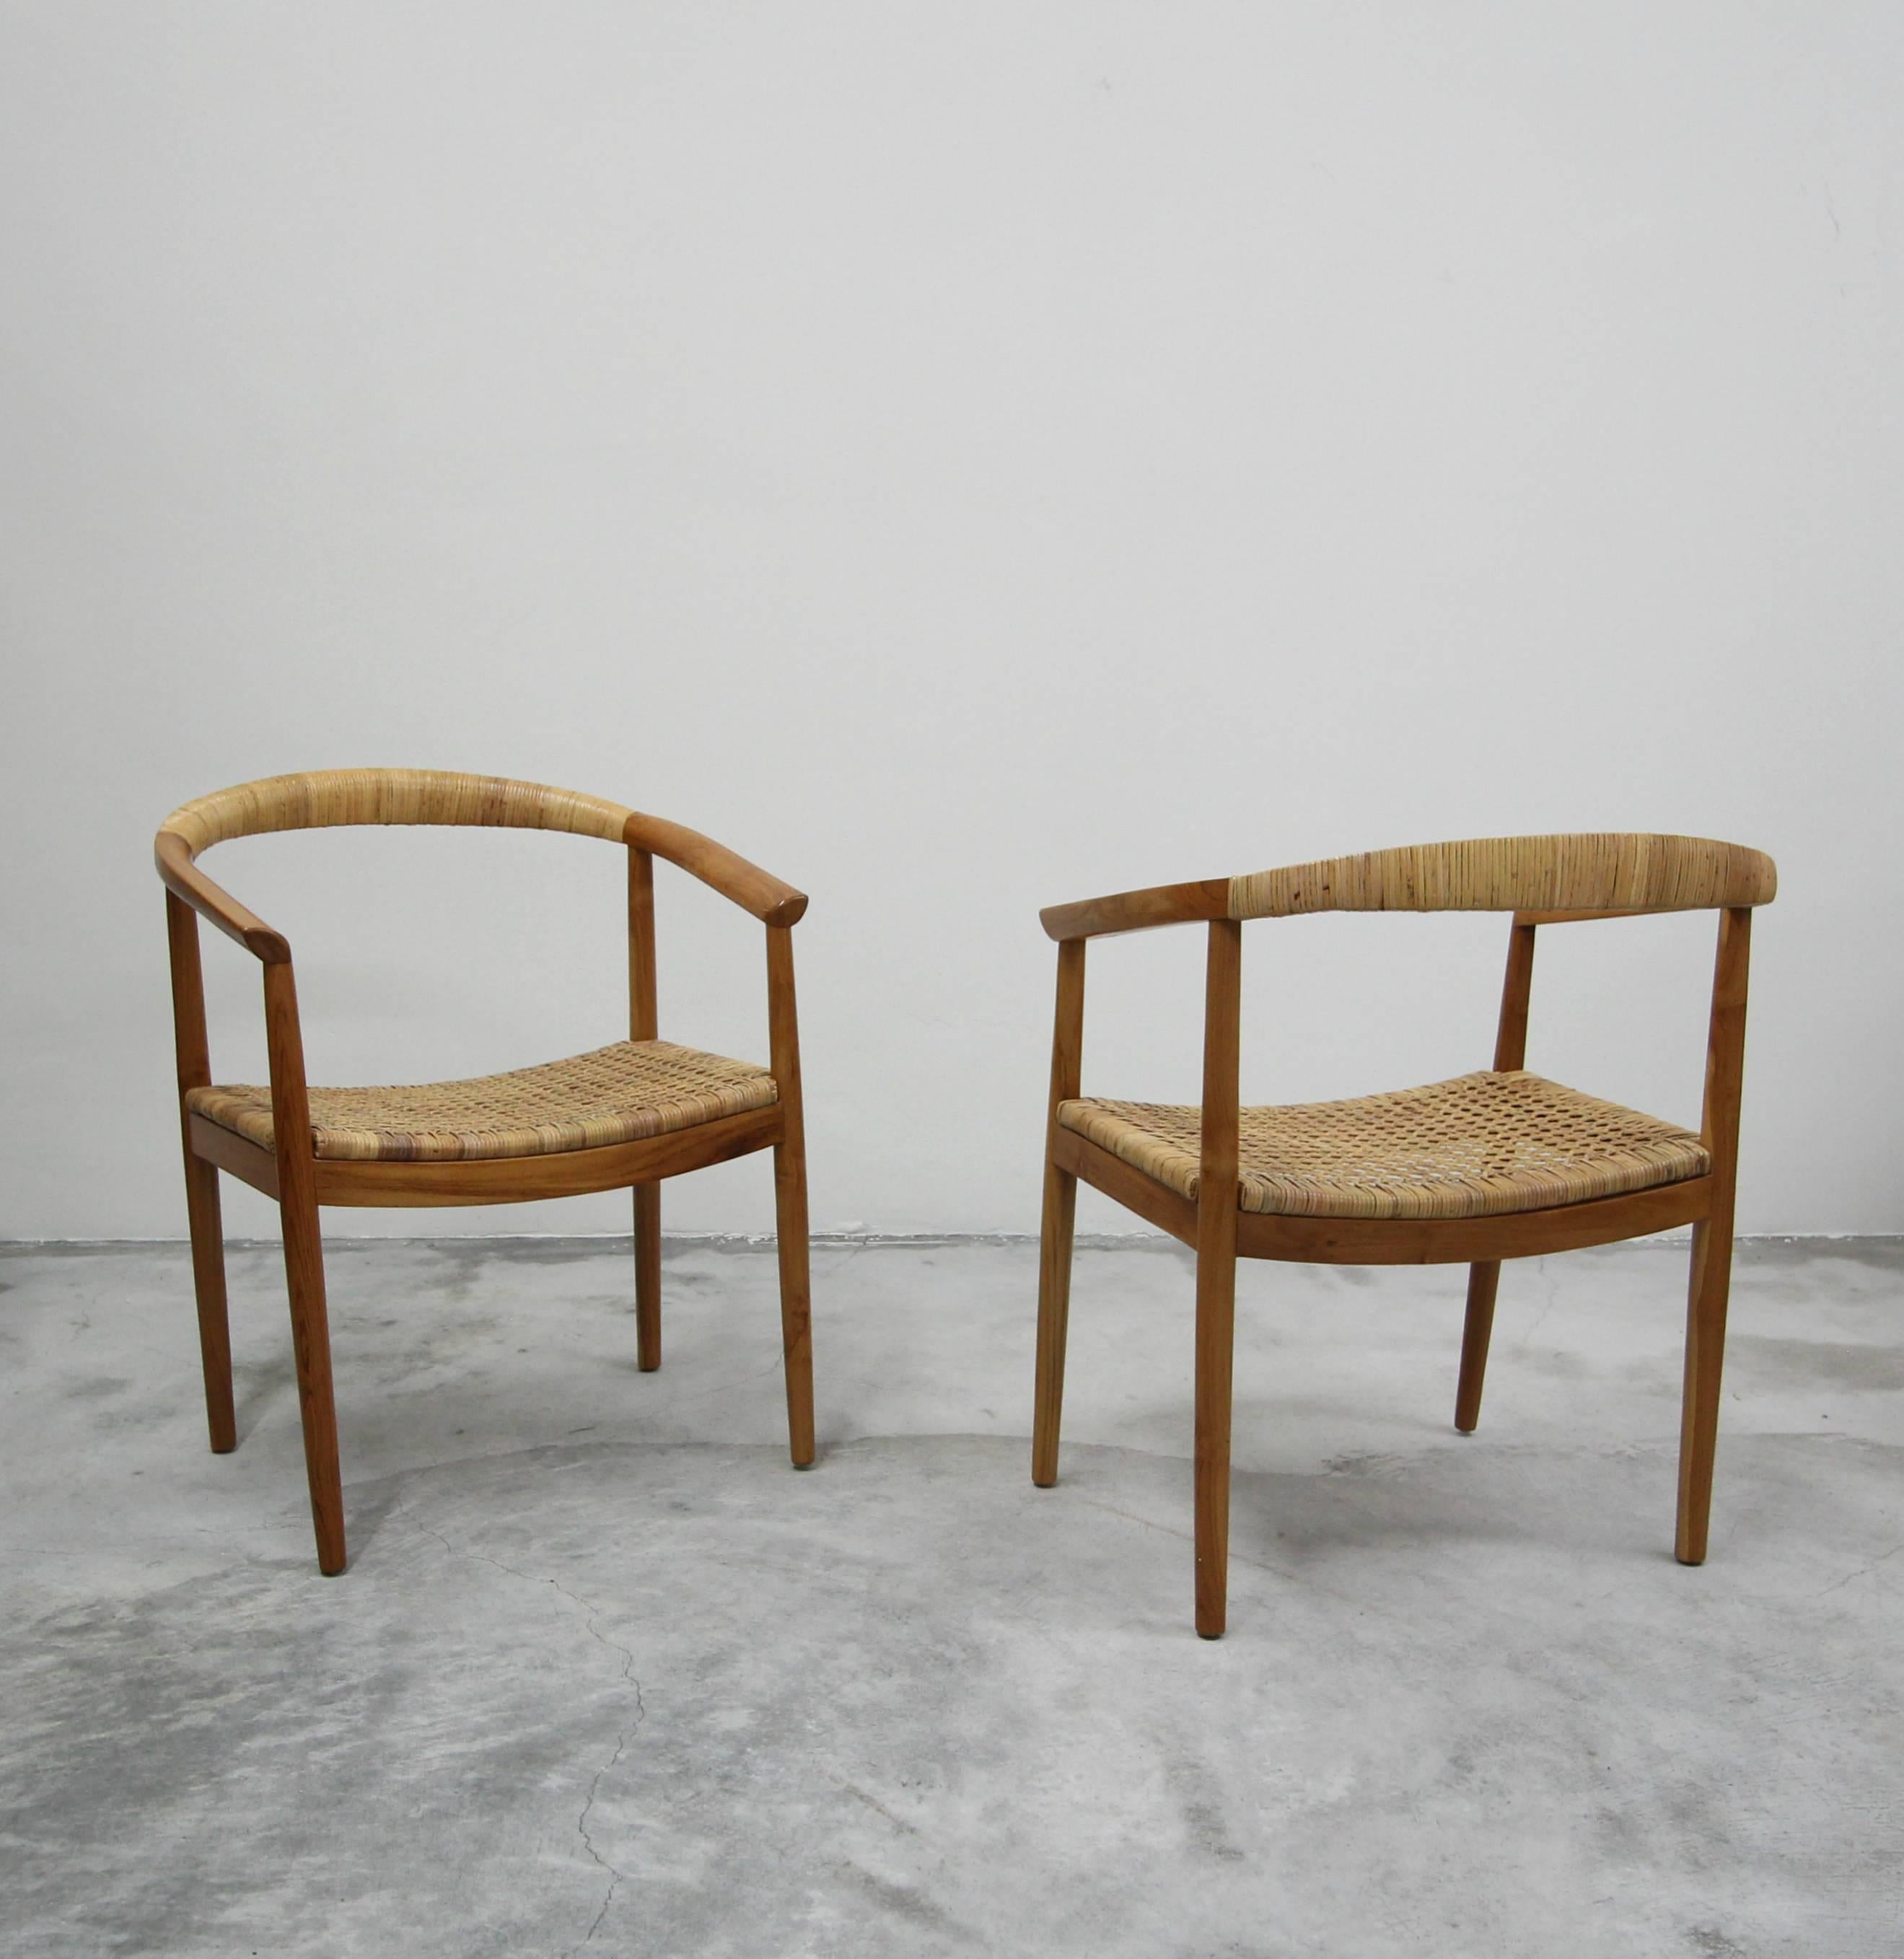 Absolutely fabulous pair of teak and cane side chairs. These chairs are large but so minimalistic. They would truly made the perfect pair of side chairs in any living space. So petite in construction they almost disappear, but nothing short of great